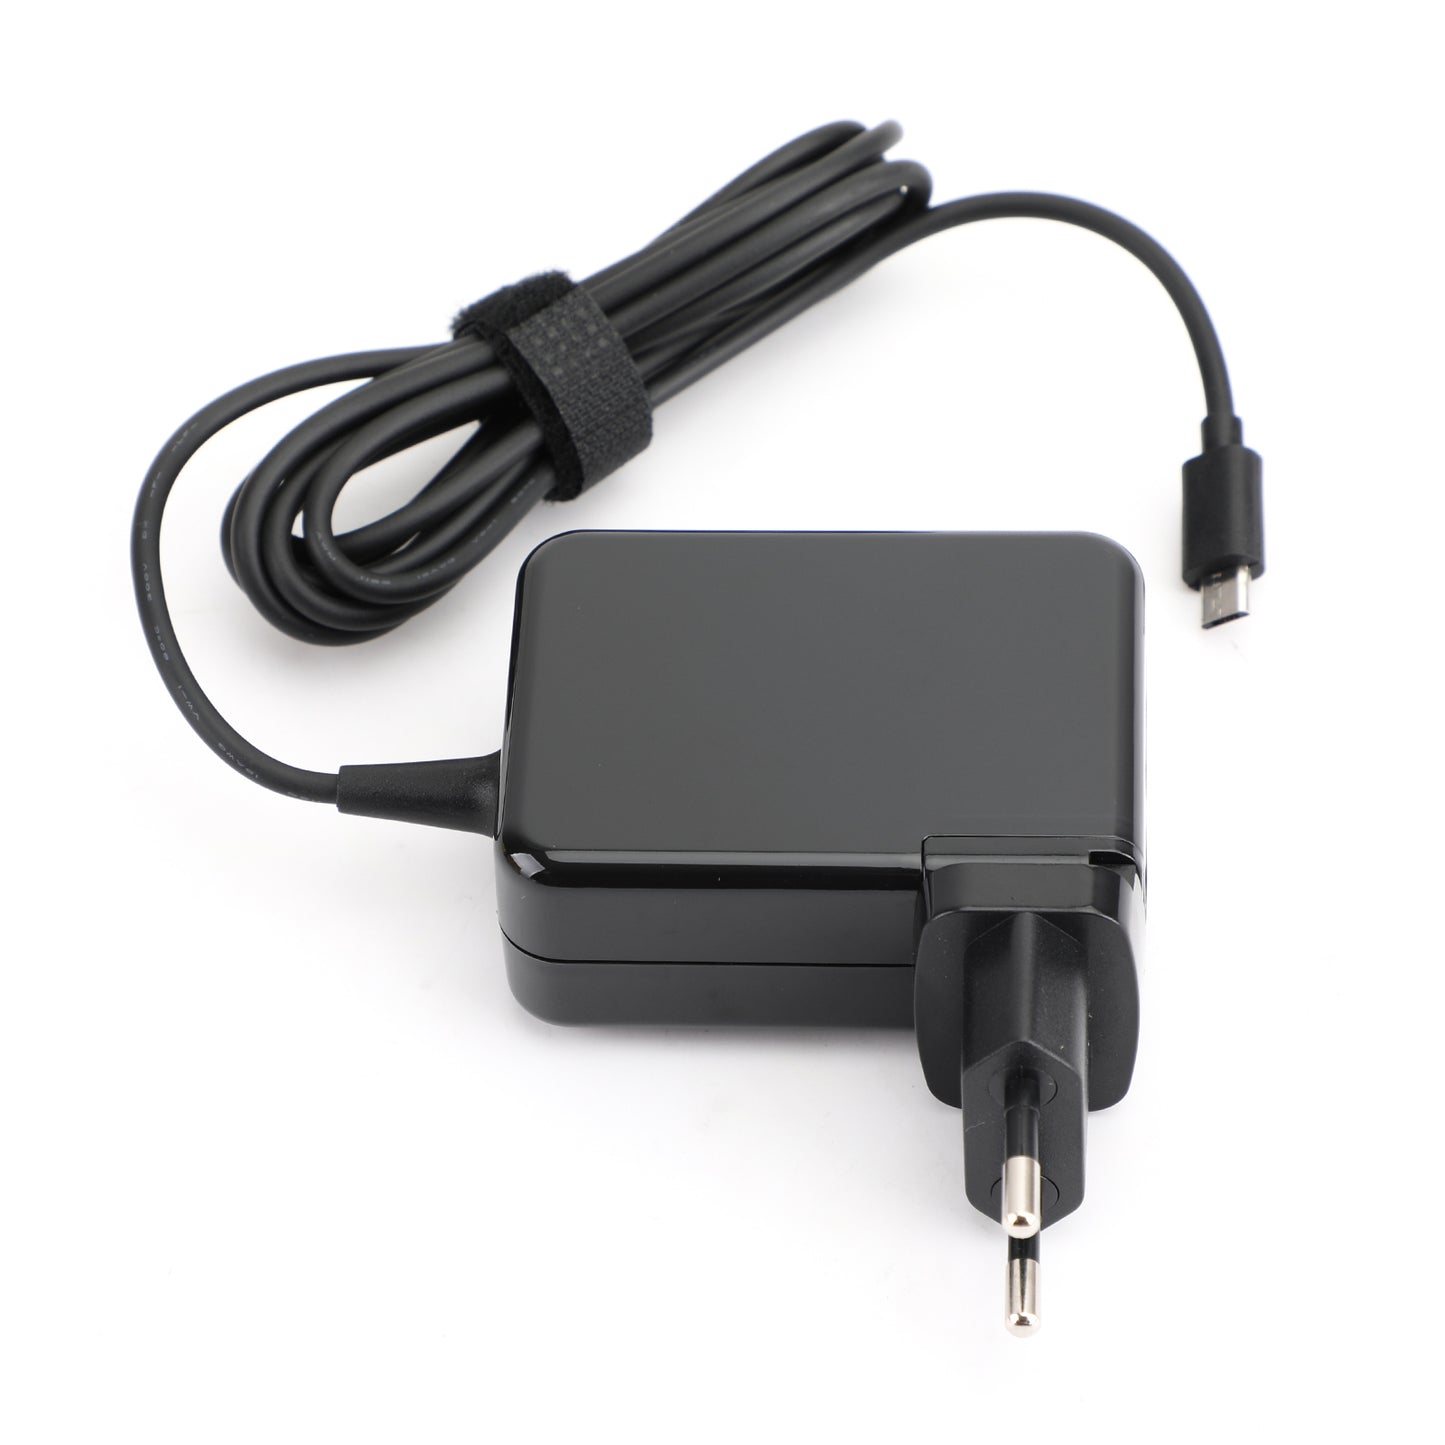 19.5V 1.2A AC Adapter Power Wall Charger for Dell Venue 11 Pro 077GR6 7140 7139